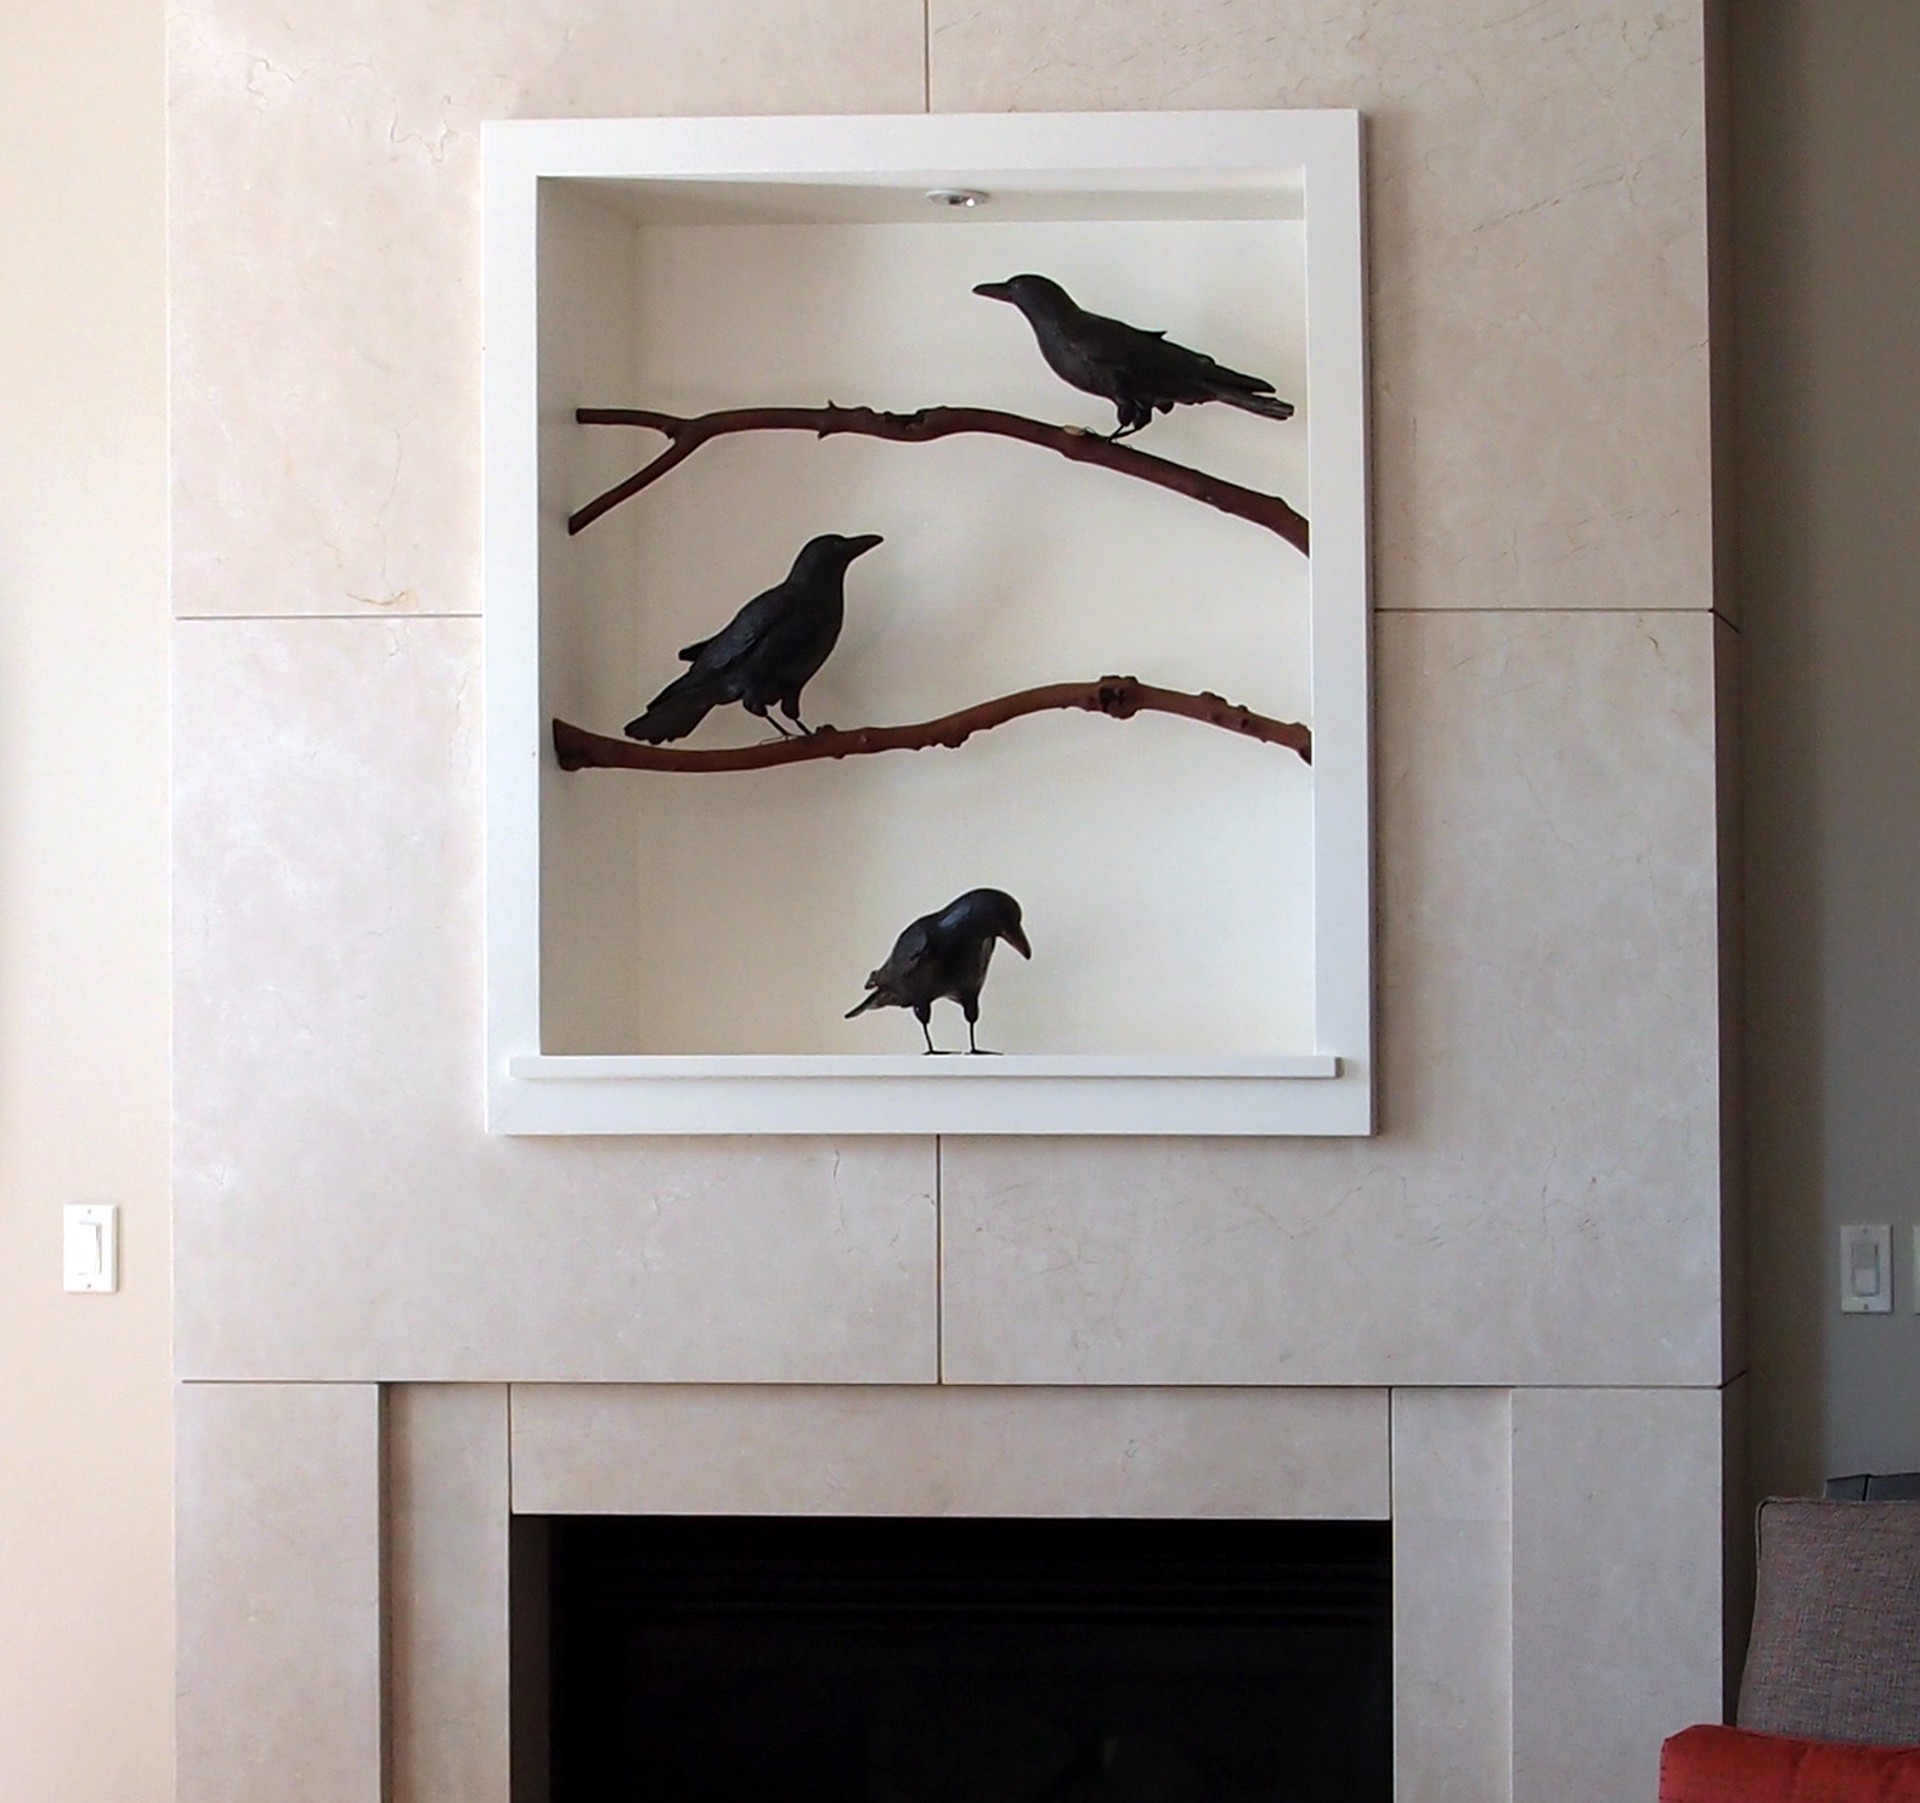 Three Crows | Elaine Hanowell by Commissioned Projects